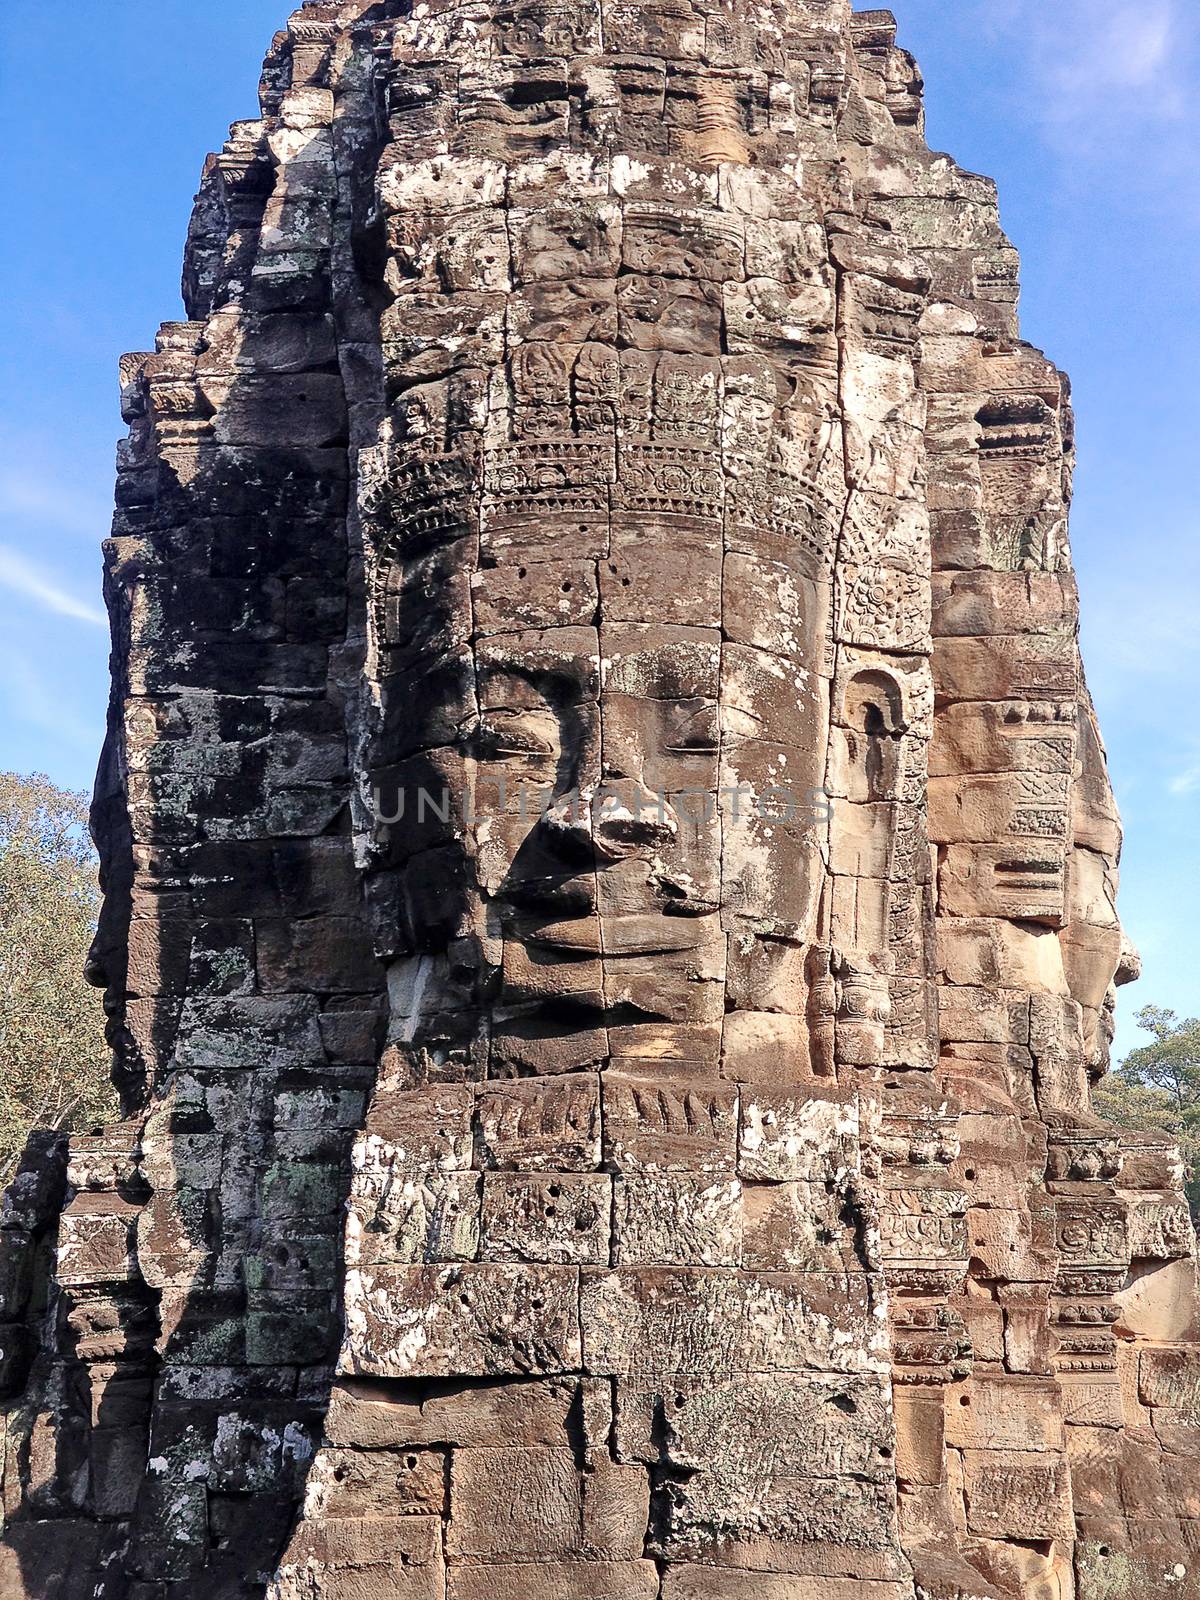 statue Bayon Temple Angkor Thom, Cambodia. Ancient Khmer archite by orsor